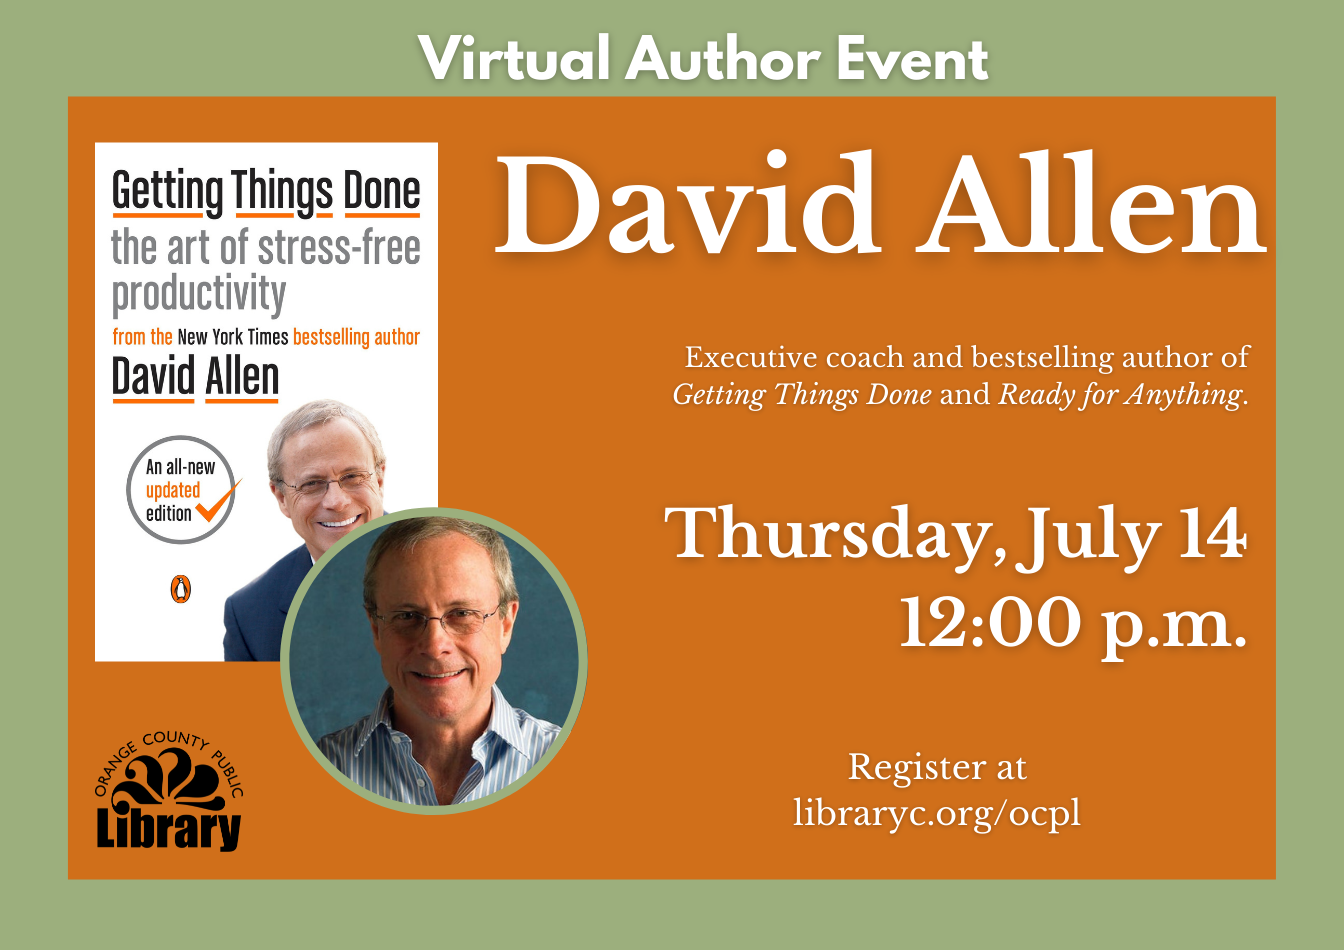 A widget advertising a virtual author event with David Allen.